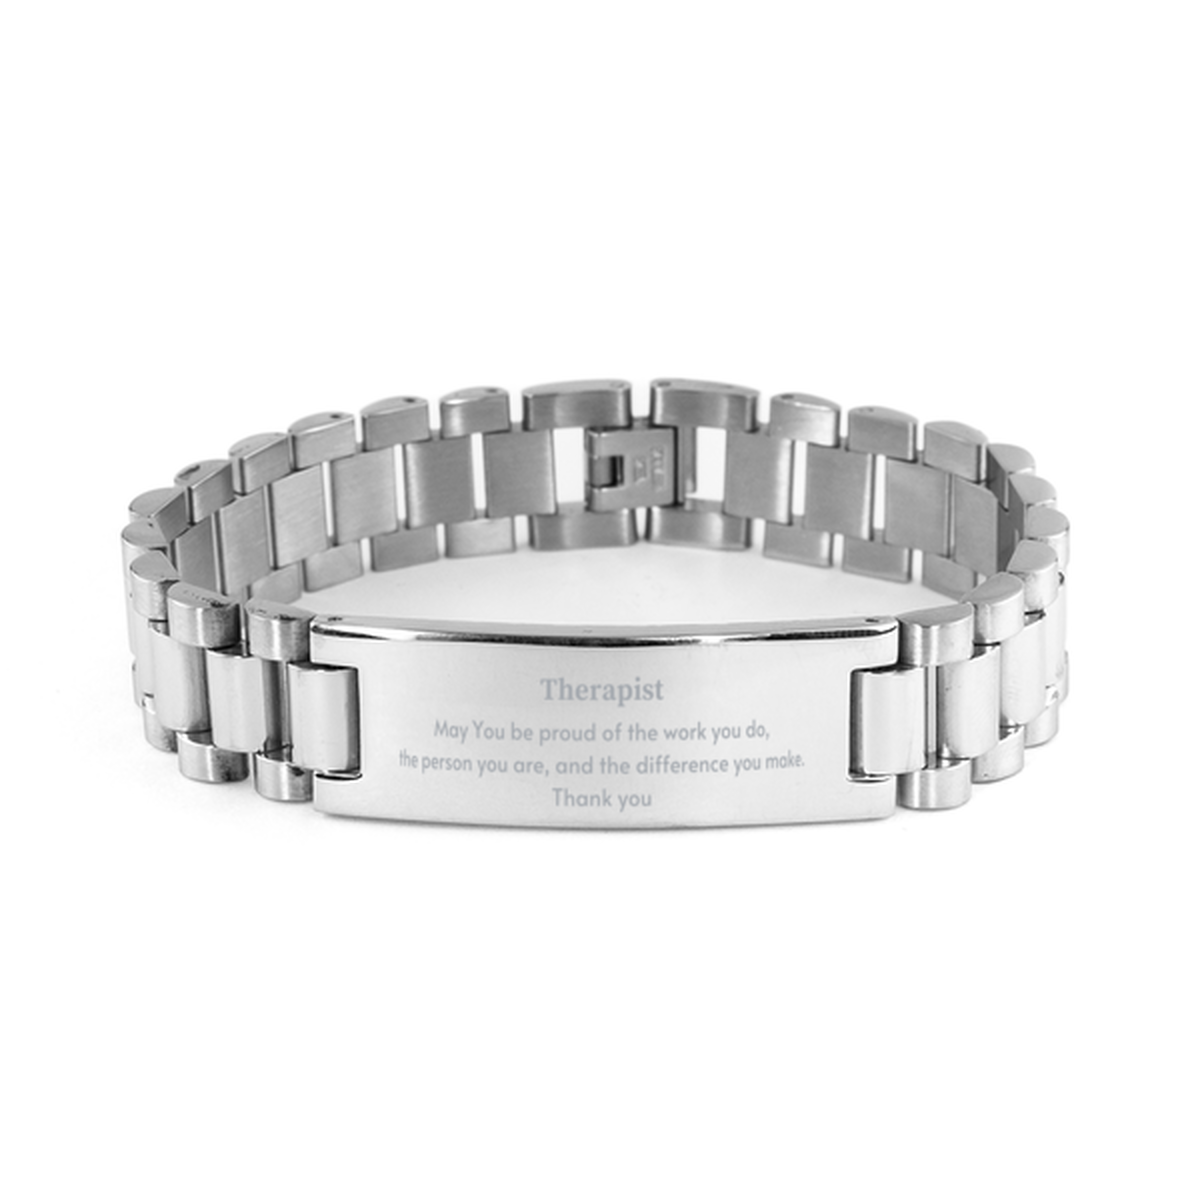 Heartwarming Ladder Stainless Steel Bracelet Retirement Coworkers Gifts for Therapist, Therapist May You be proud of the work you do, the person you are Gifts for Boss Men Women Friends